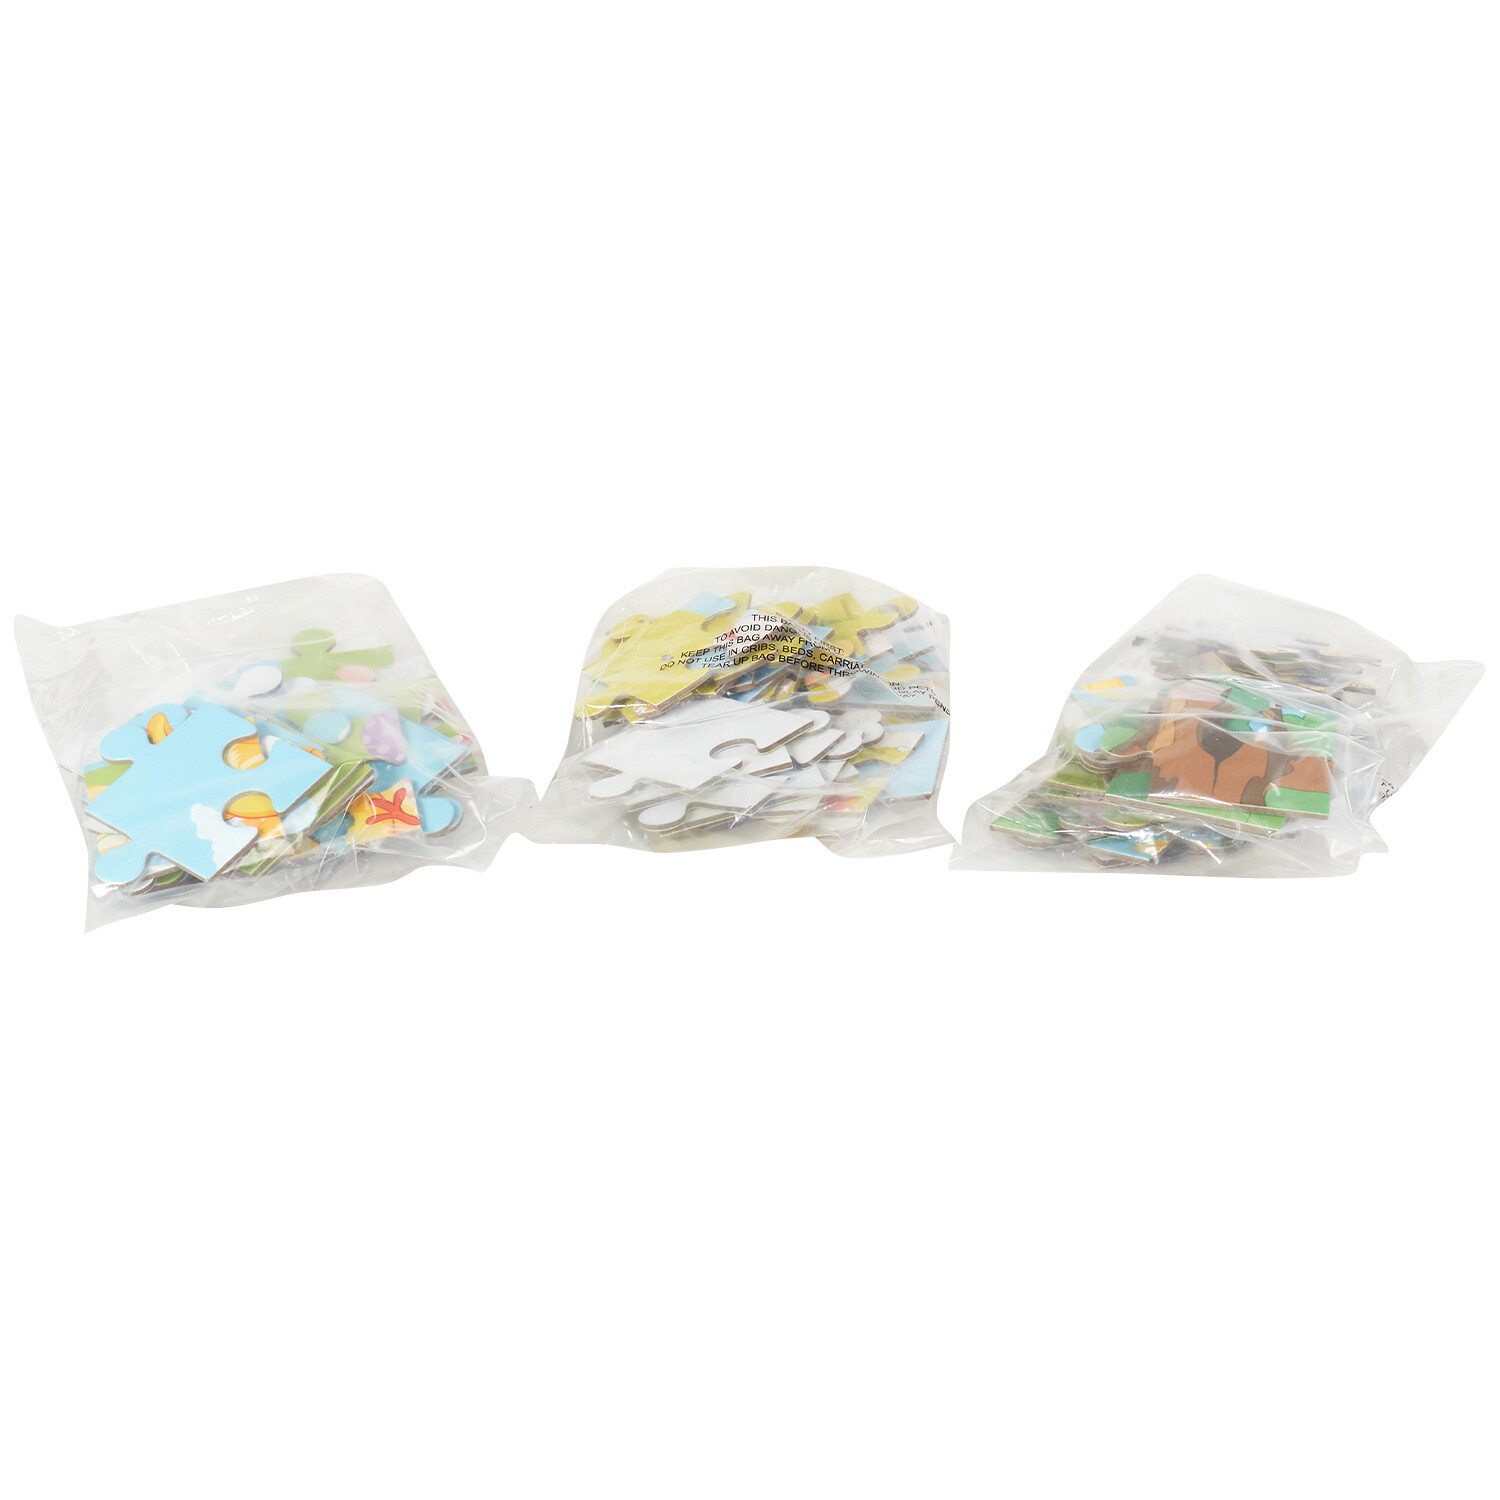 3-in-1 Easter Jigsaw Puzzle Image 5